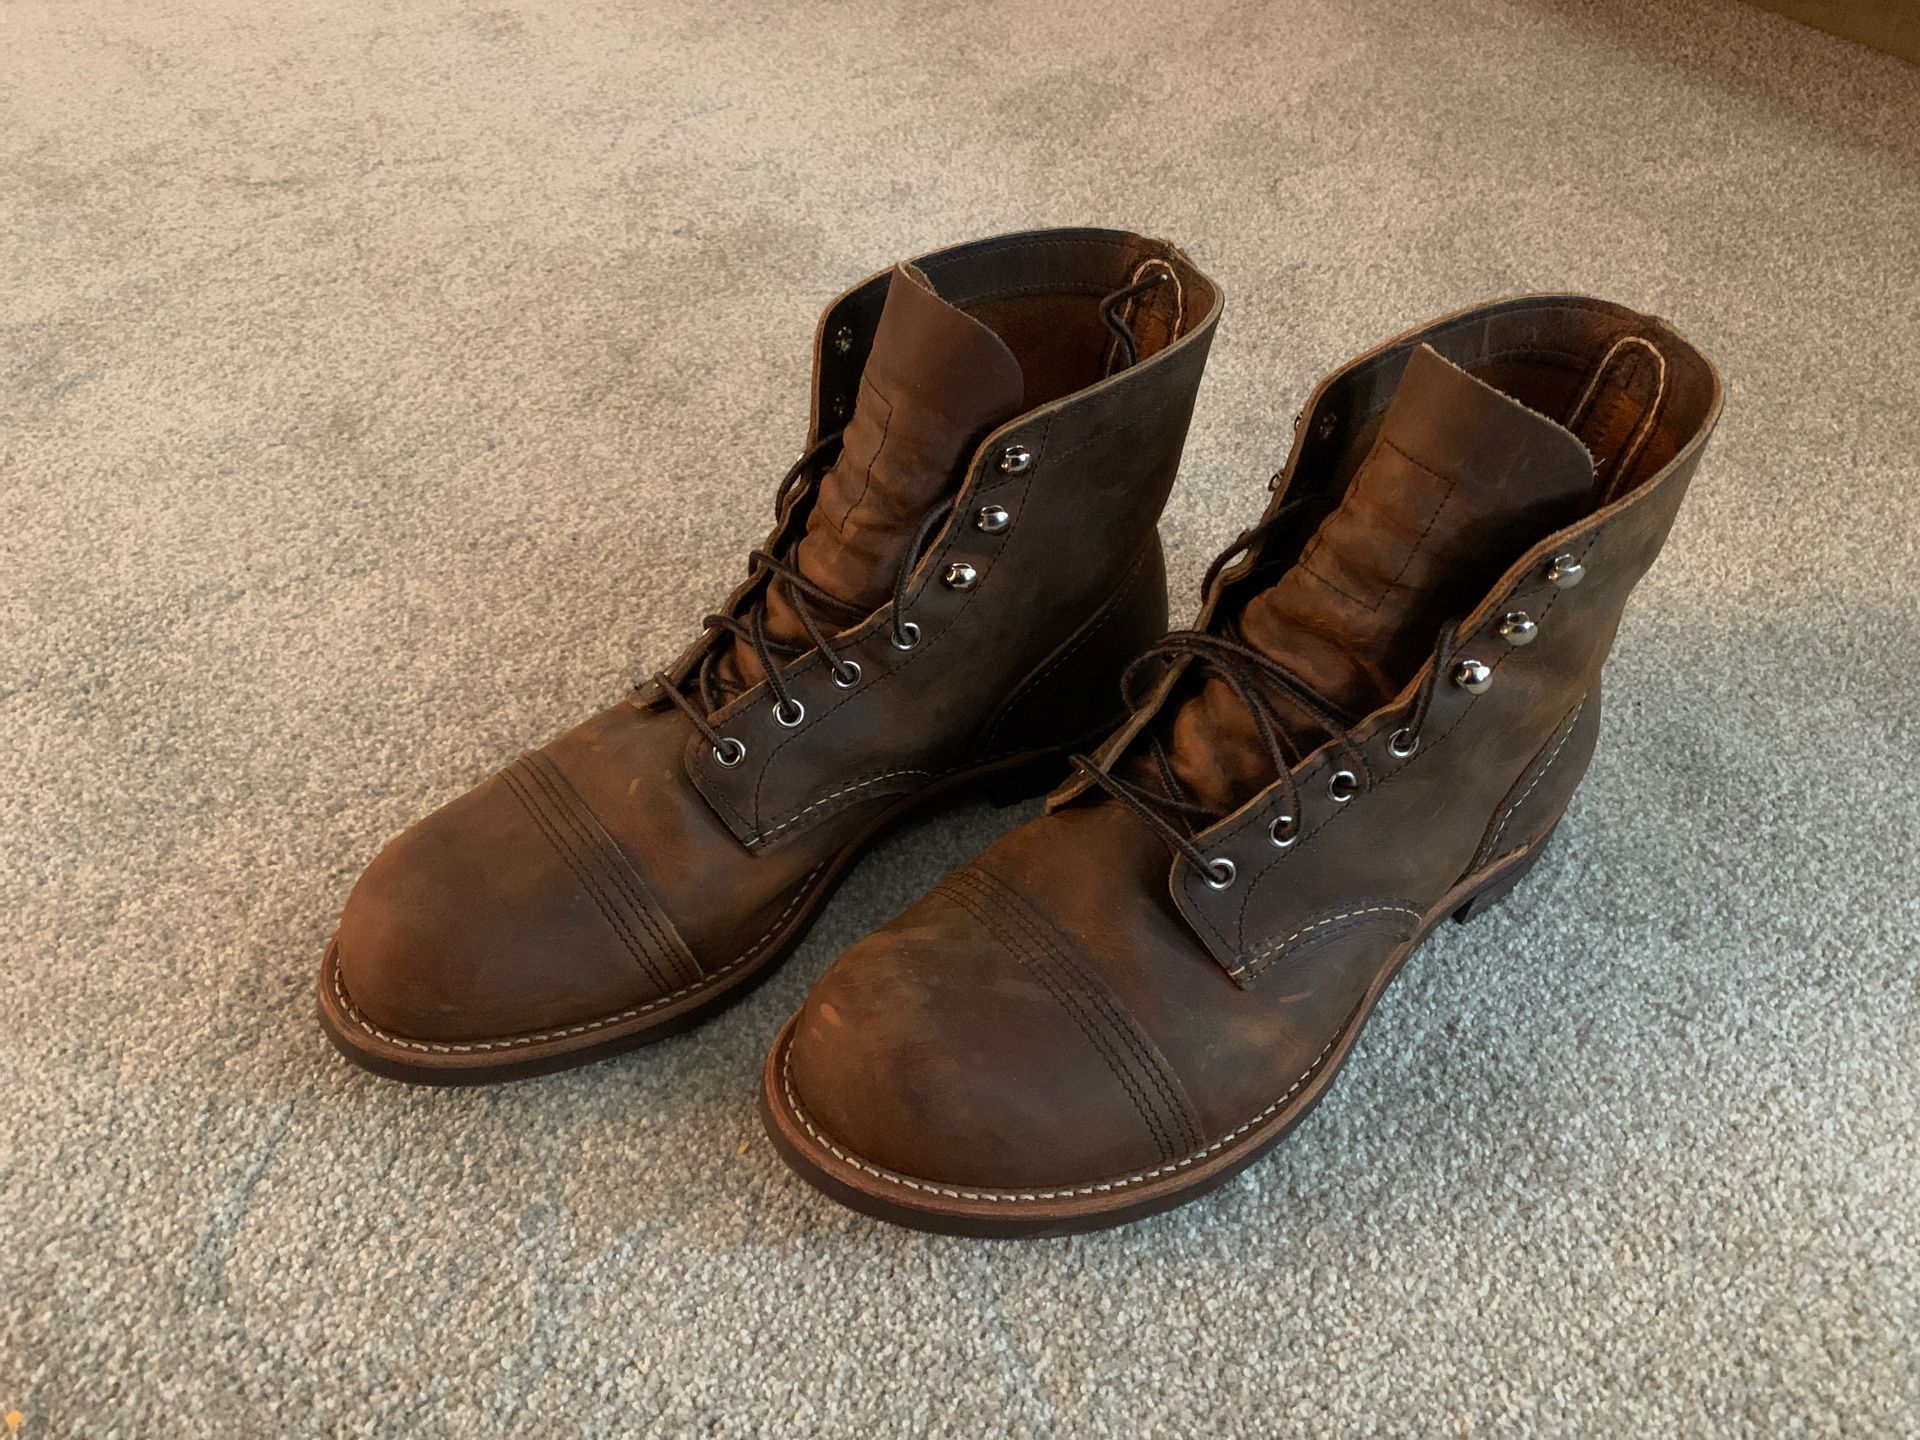 Red Wing Heritage Boots size 12 USA